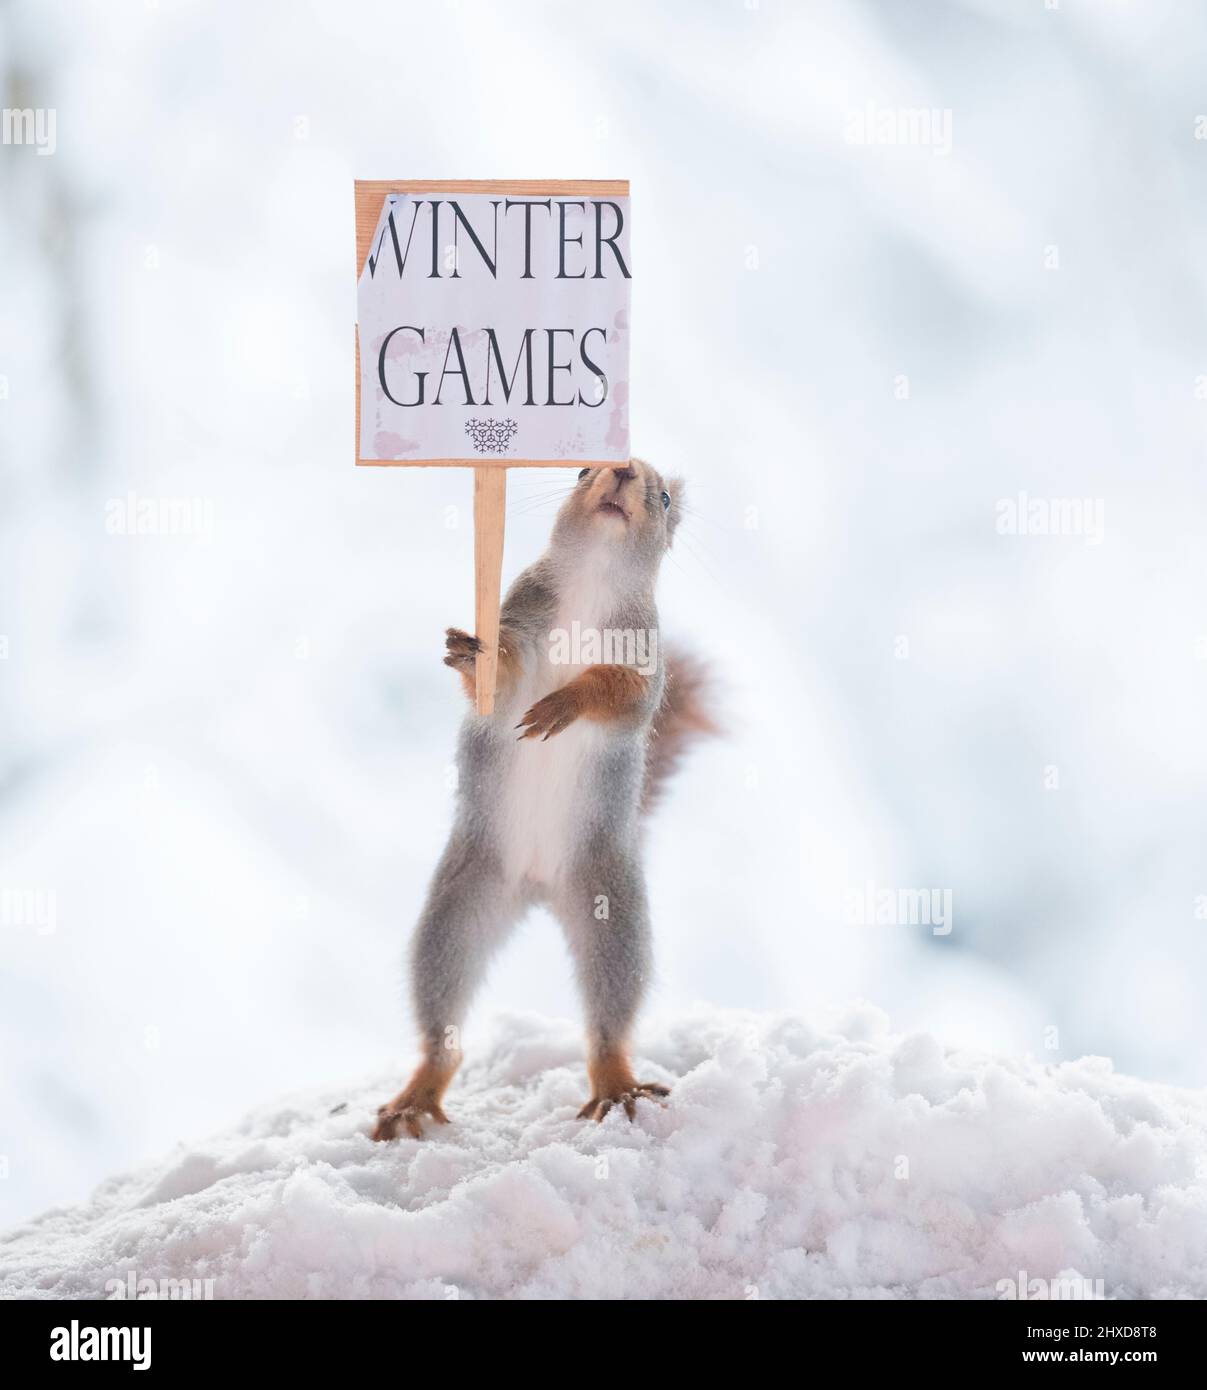 red squirrel holding a sign with winter games text Stock Photo